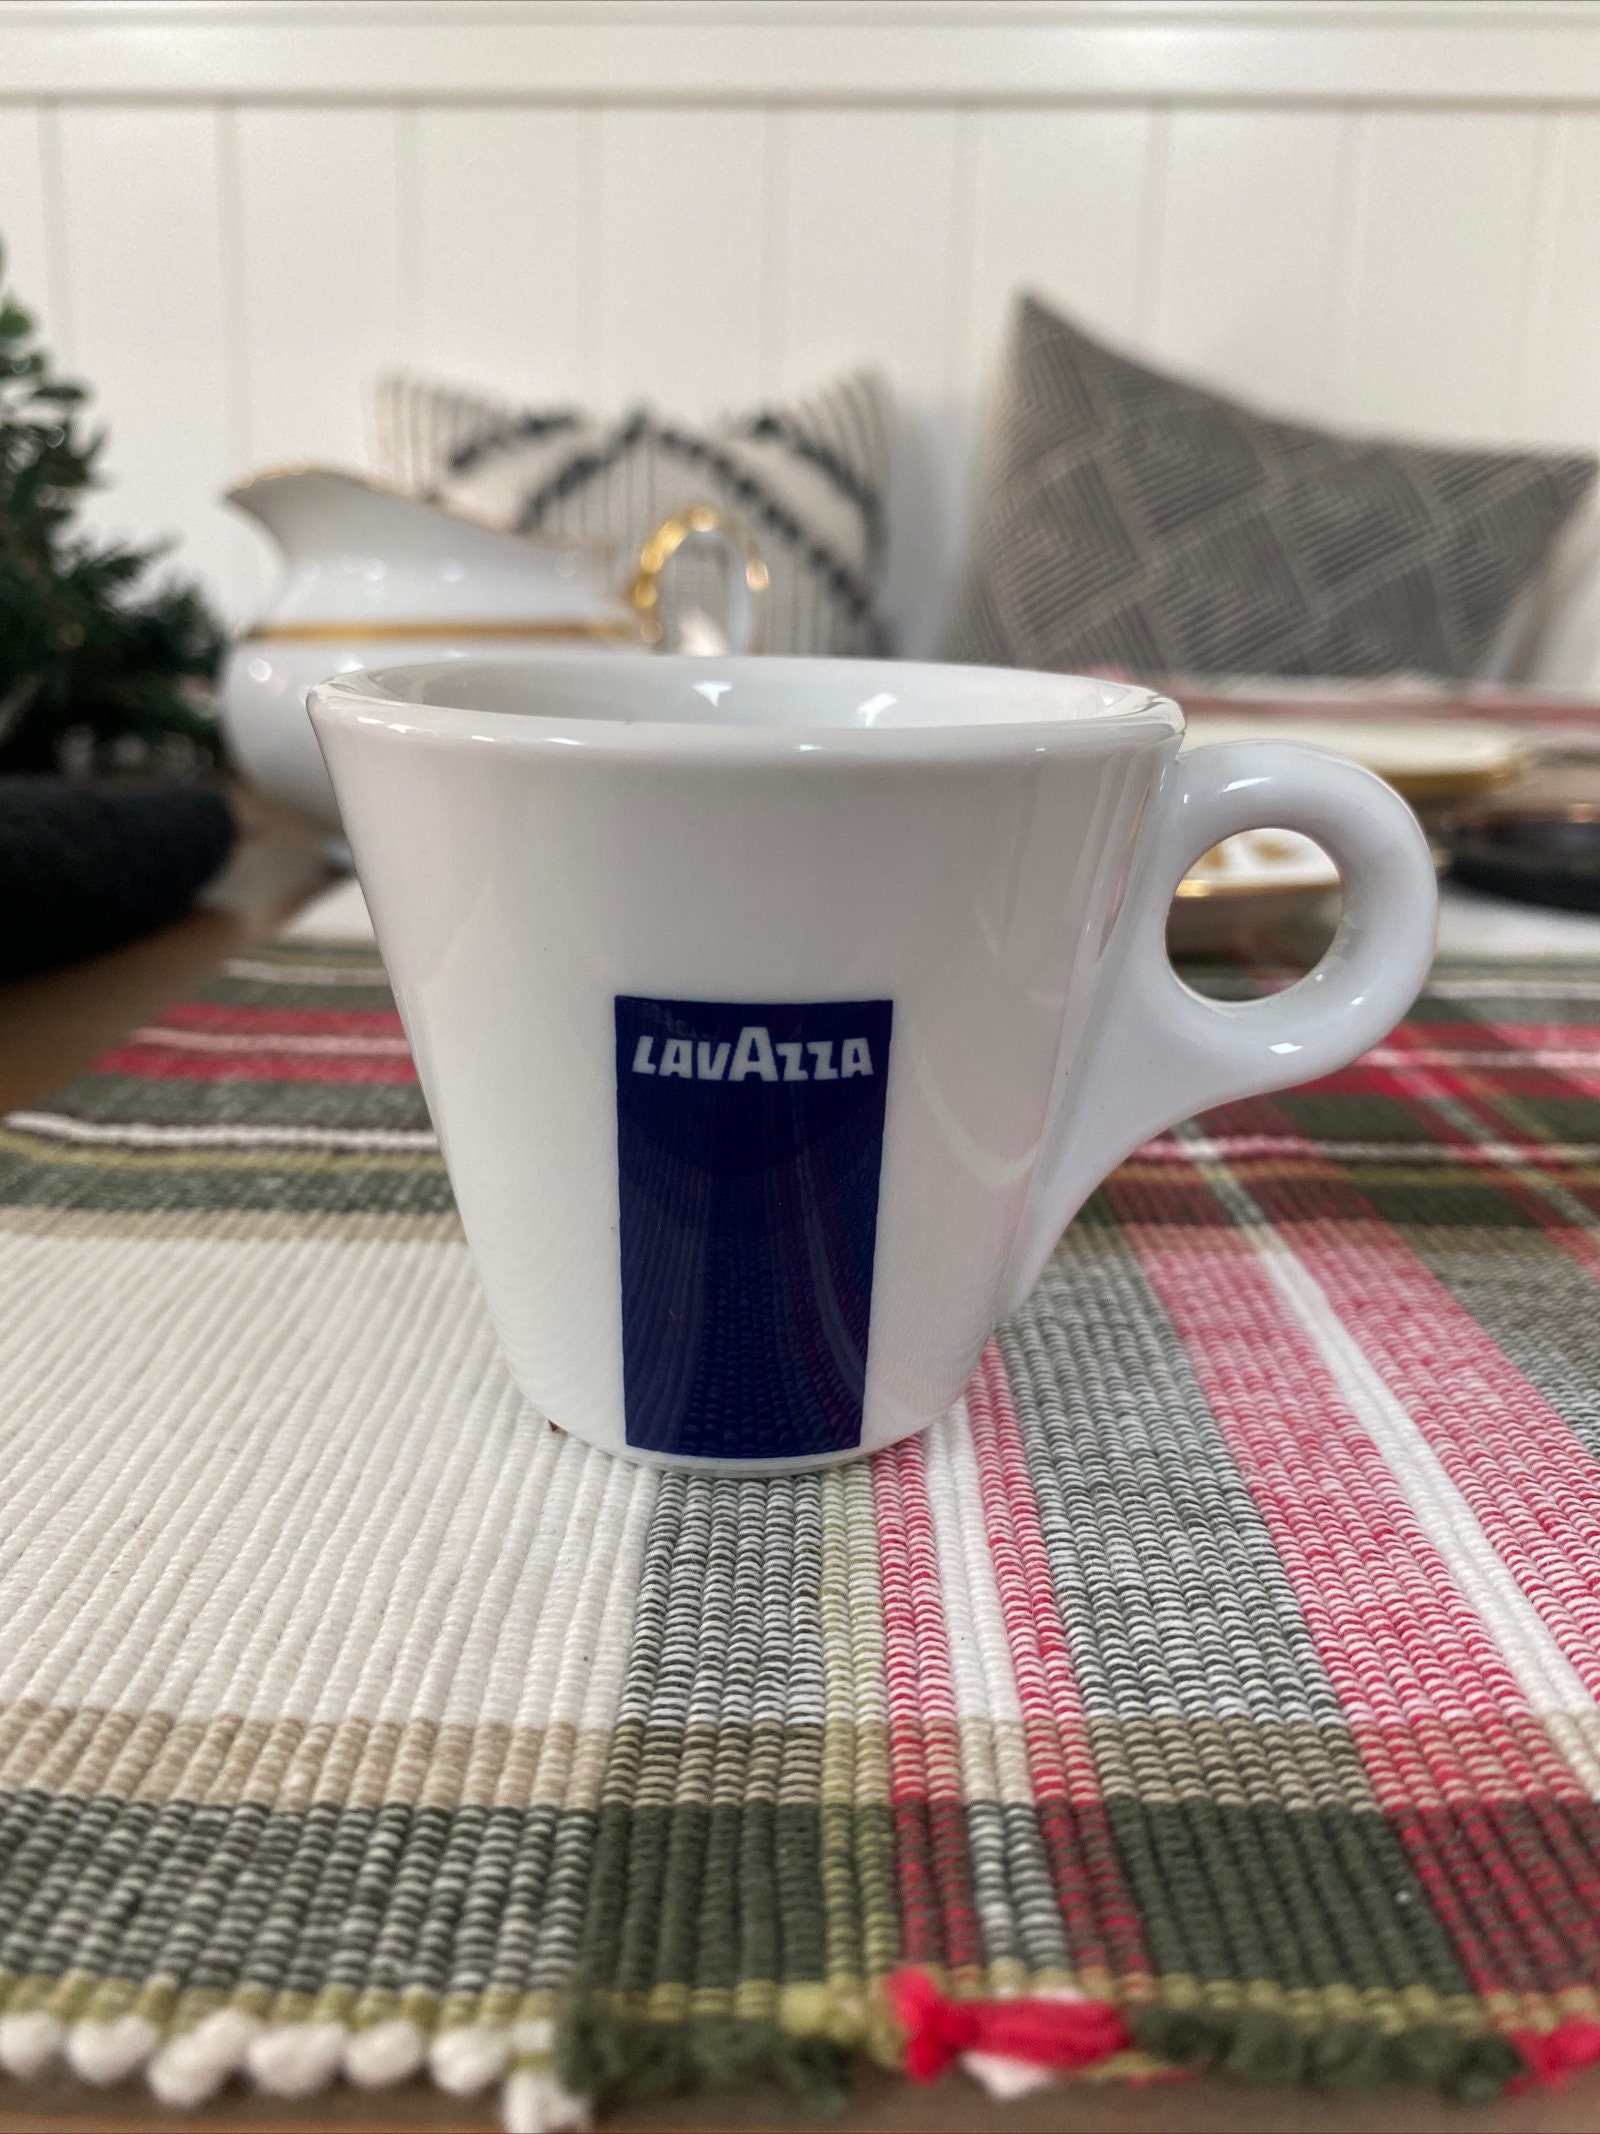 Lavazza 2oz. Espresso Cups - Set Of 2 (Cups ONLY) Imported From Portugal